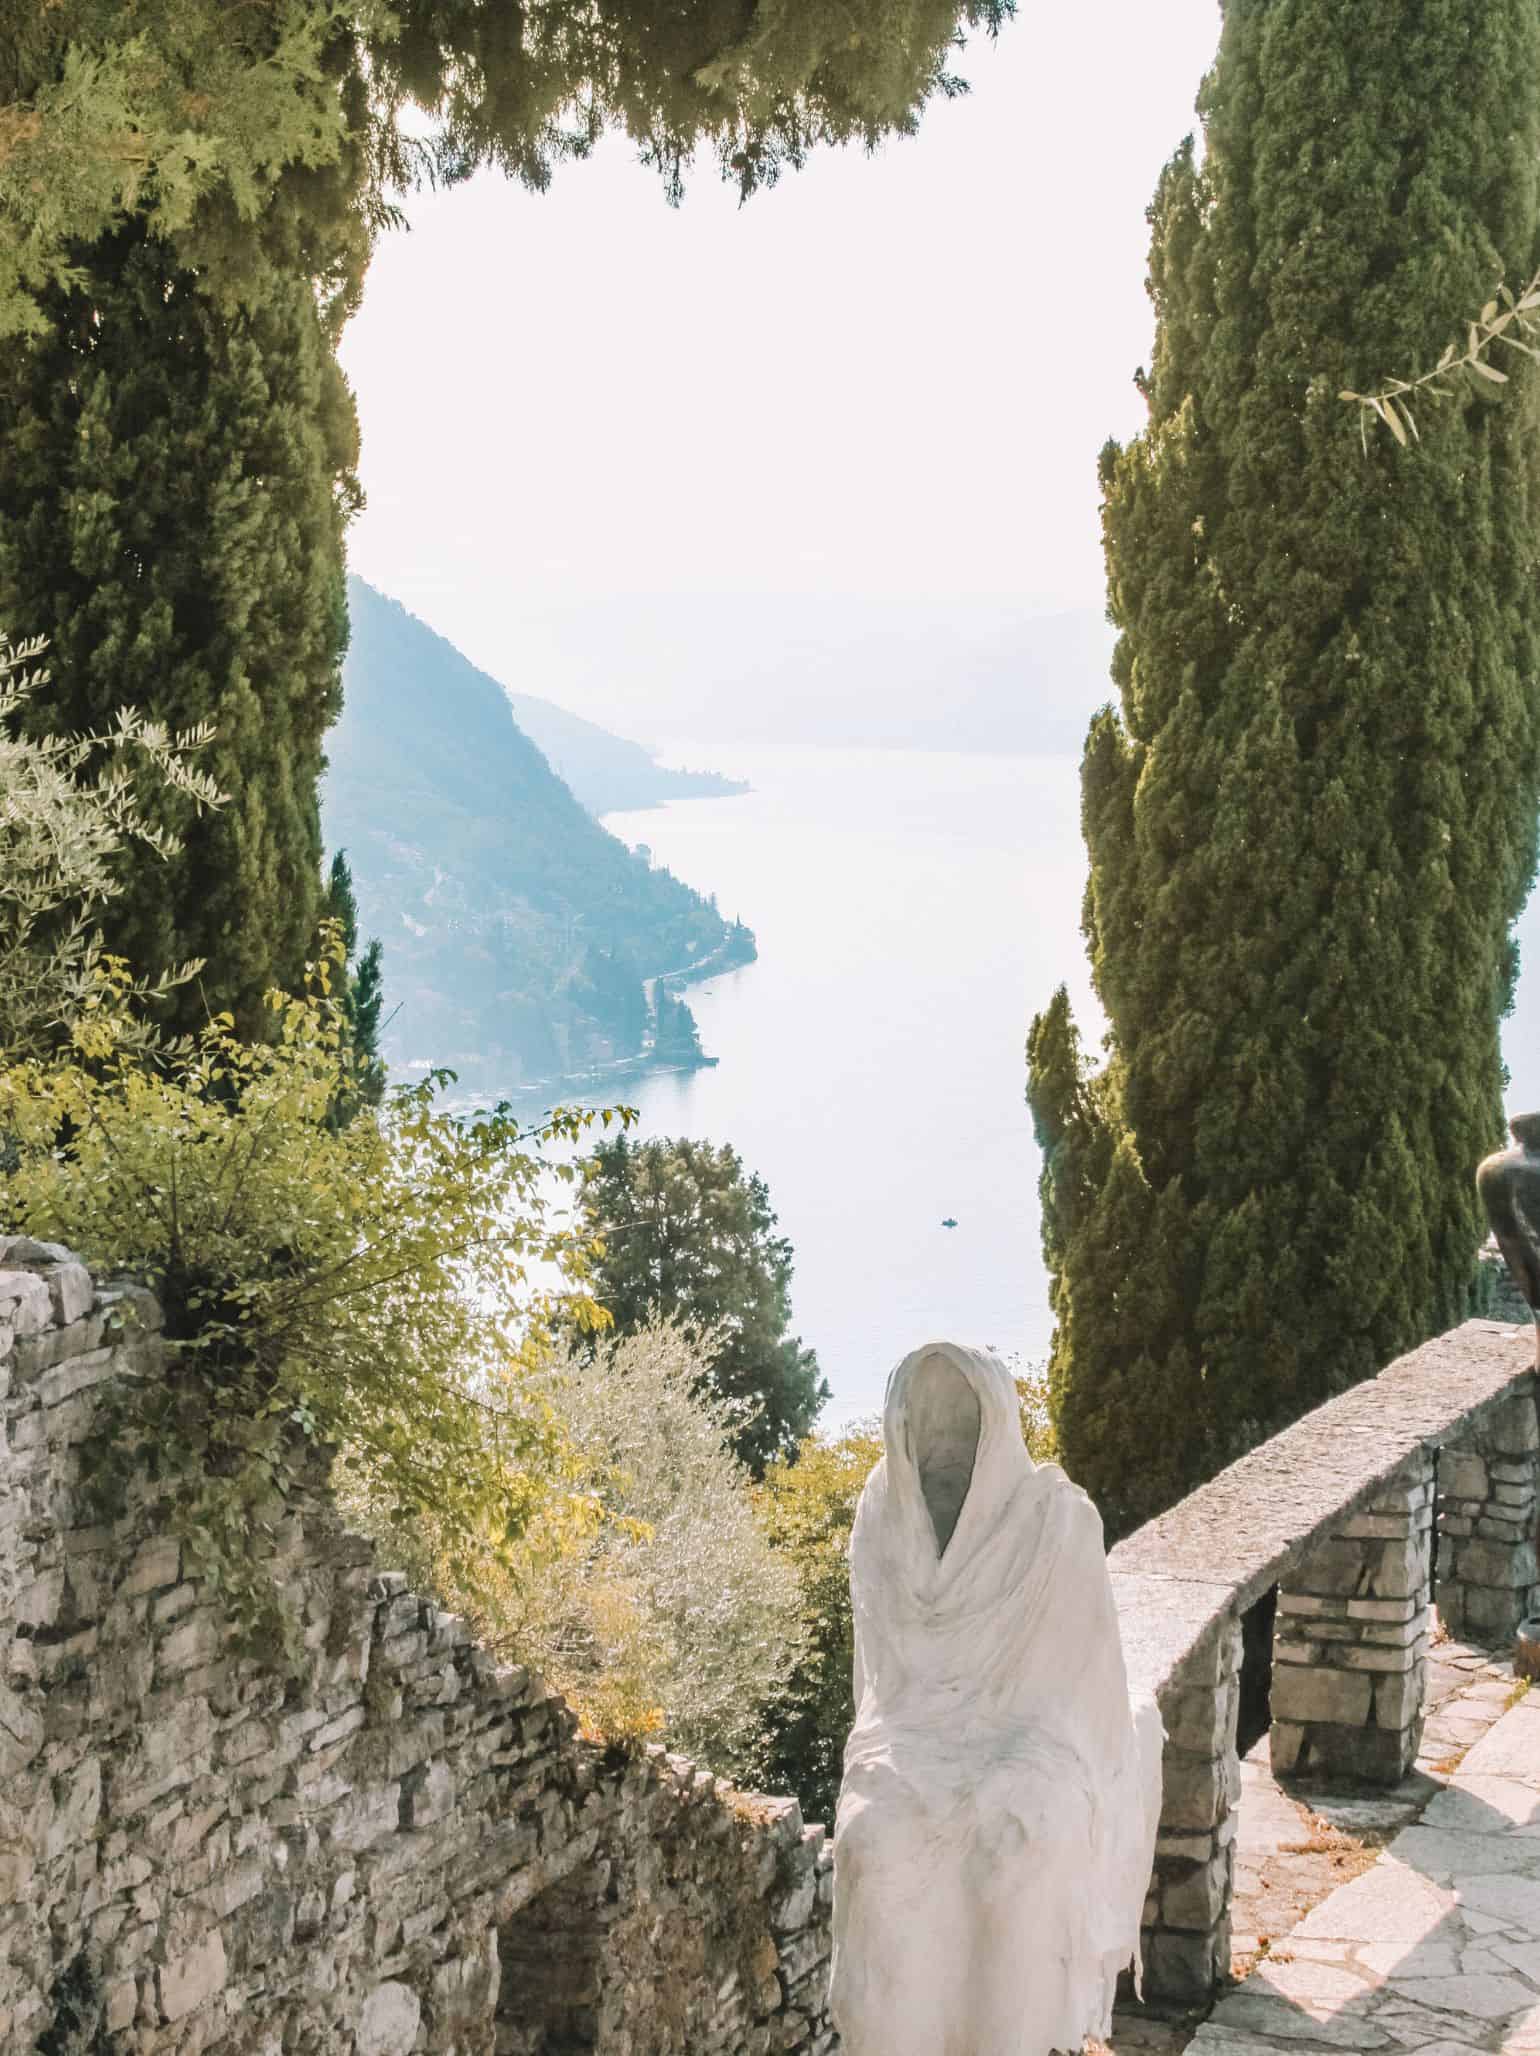 Vezio Castle views – a must-visit on any Lake Como in October itinerary.